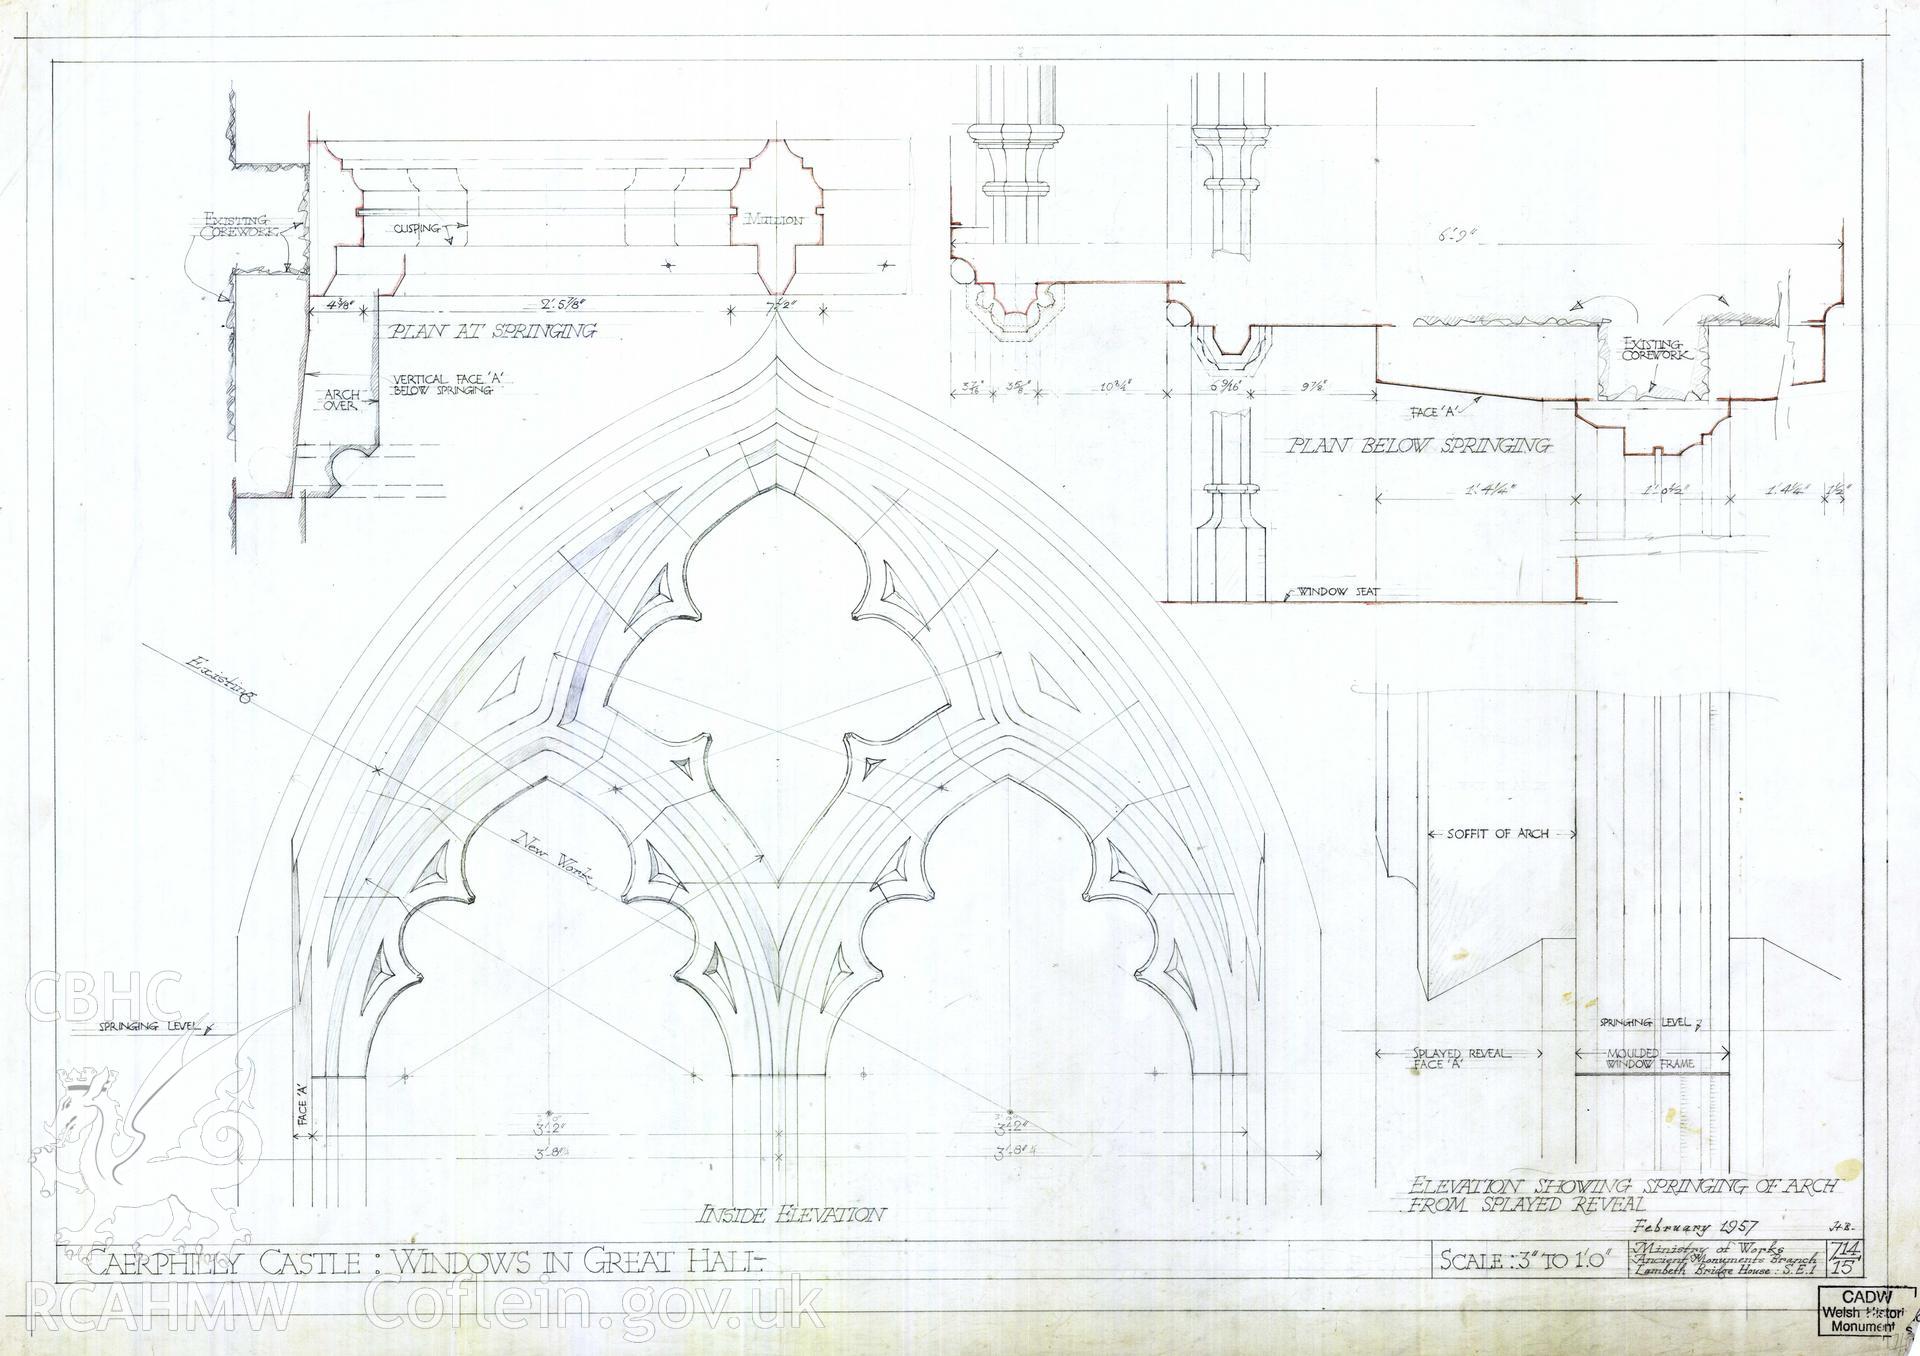 Cadw guardianship monument drawing of Caerphilly Castle. Hall, tracery, interior elevations. Cadw ref. no: 714/15. Scale 1:4.